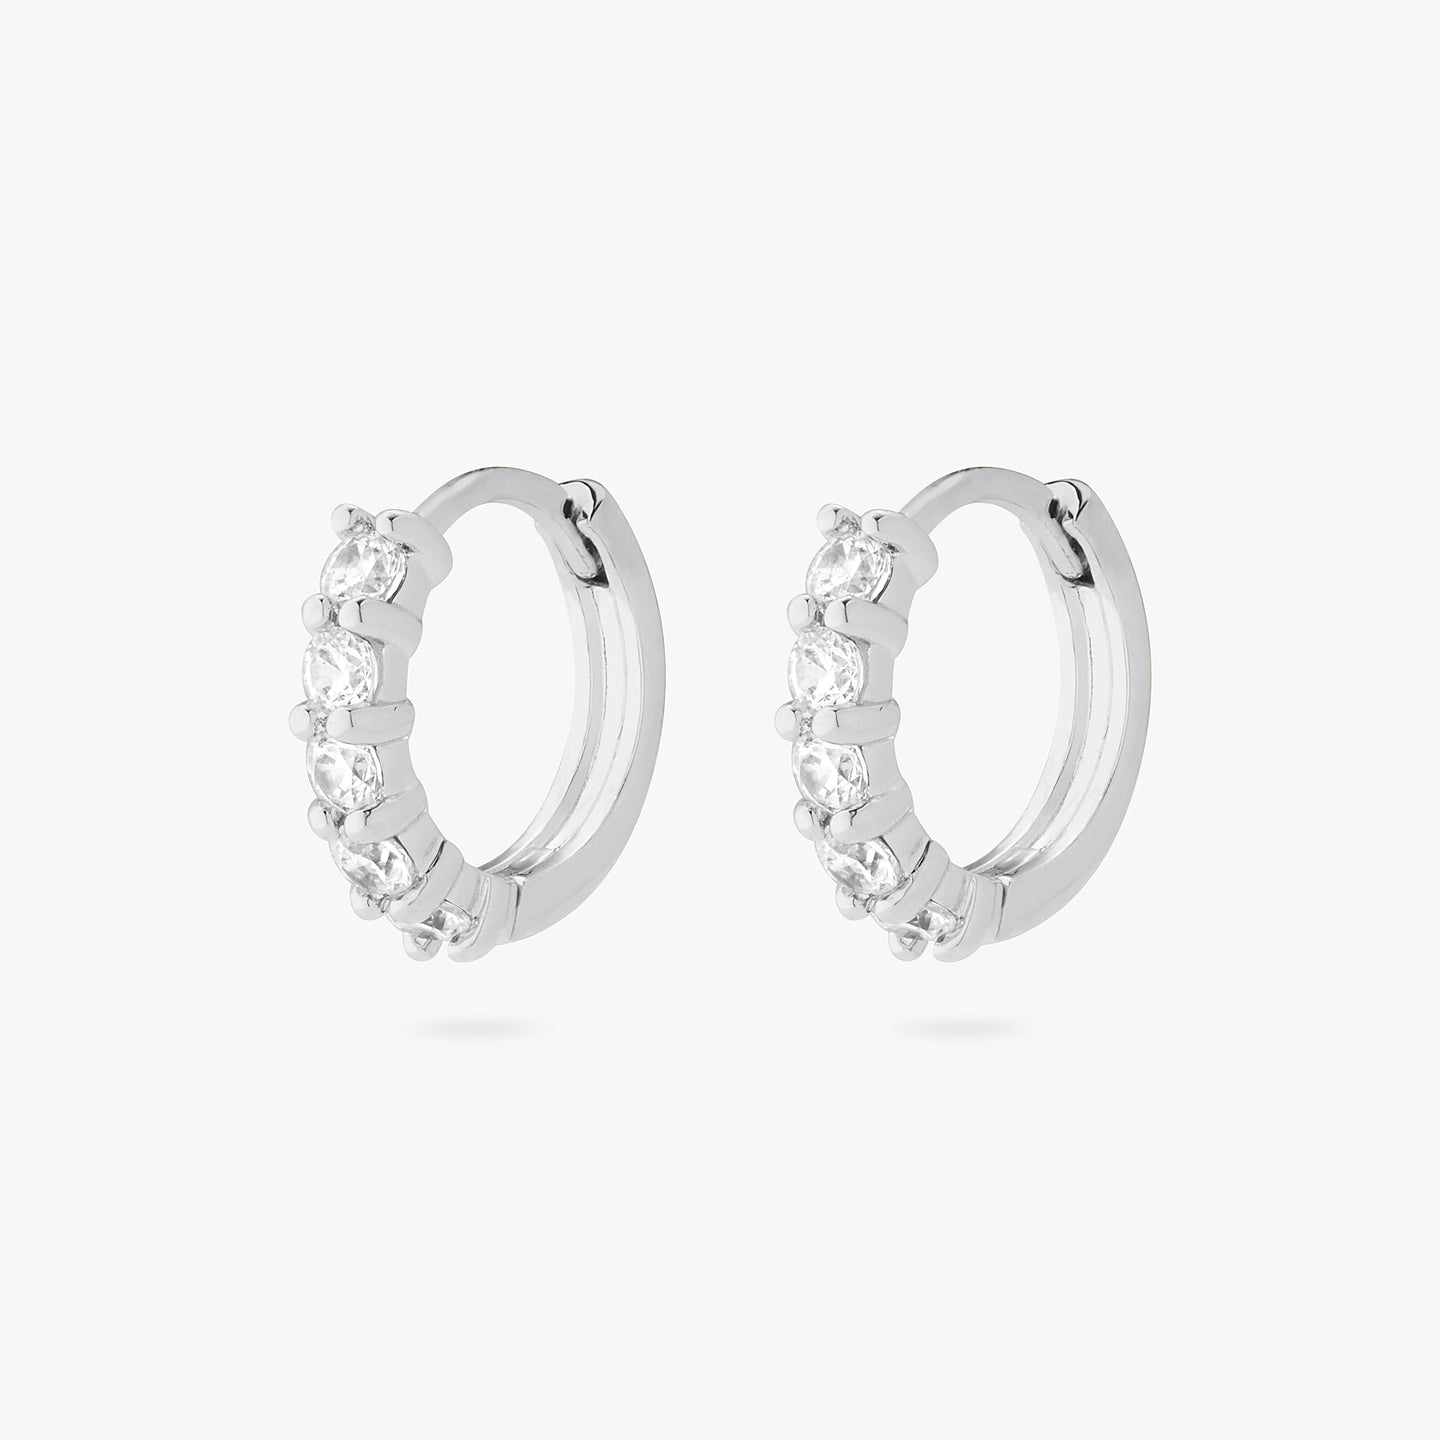 An image of a pair of silver/clear pave huggies with max pave stones. [pair] color:null|silver/clear